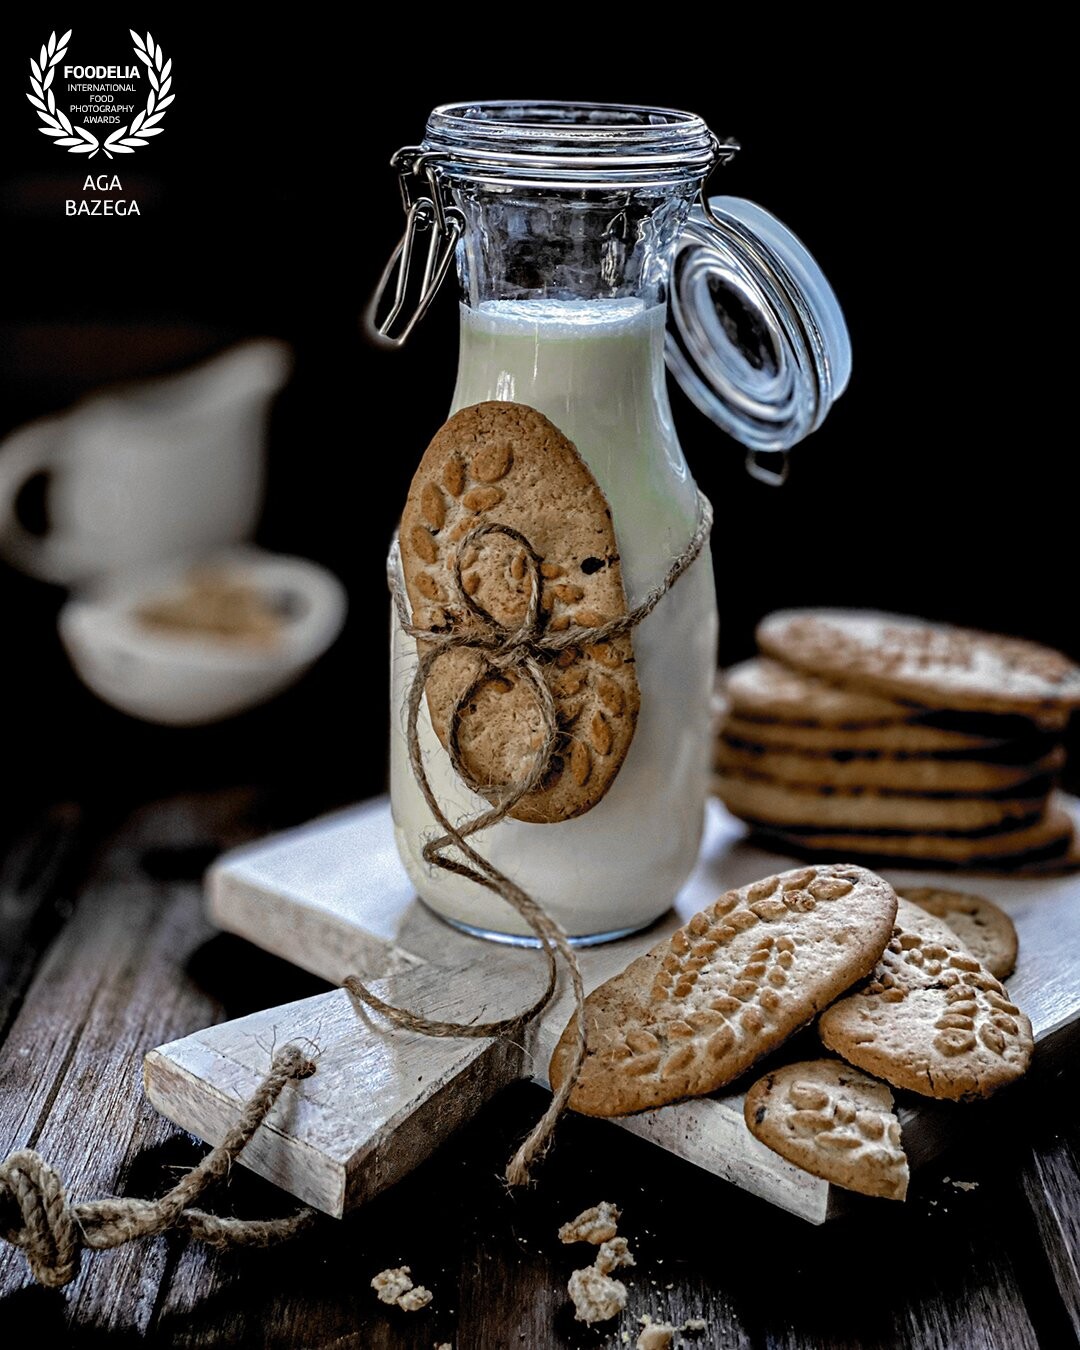 Old fashioned oatmeal cookies with goat milk. Image created for a photography challenge „Rustic and vintage”. Captured in my studio with a natural light.